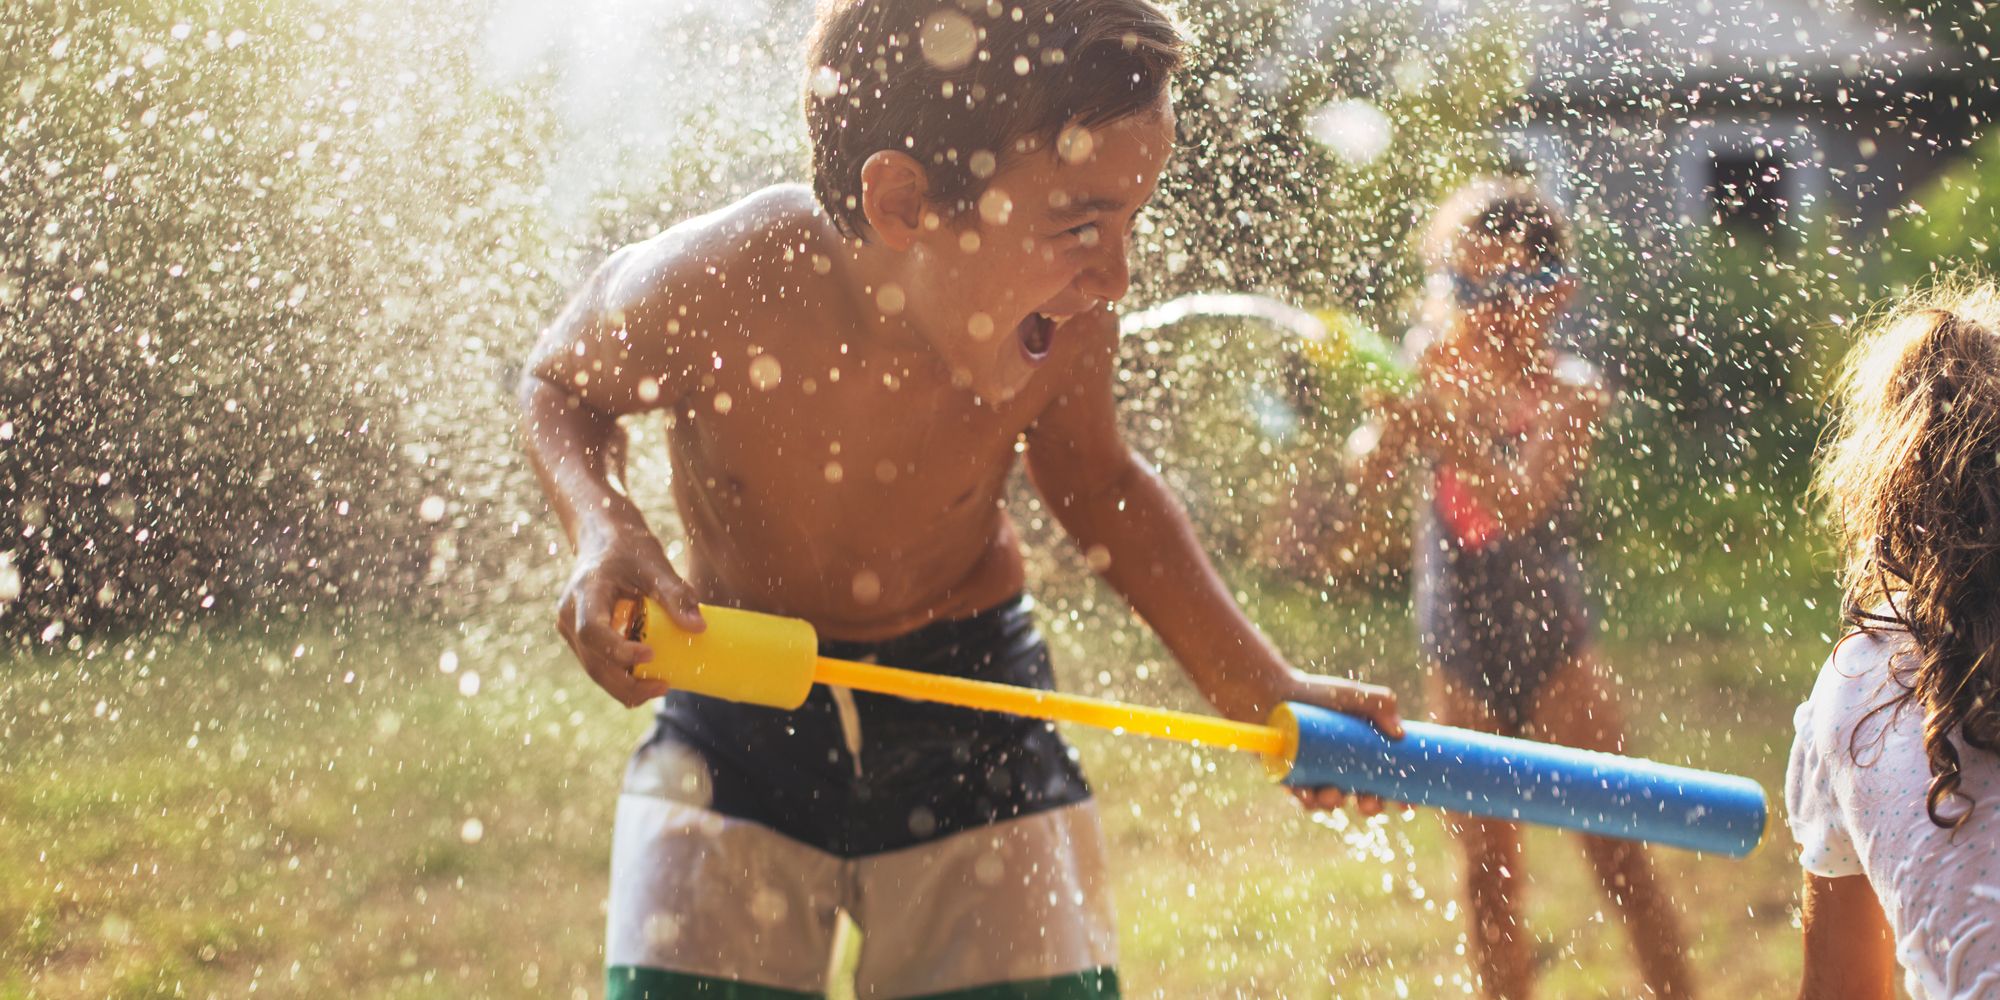 Joyin 2 Pack Water Pistols review: Water lot of fun for a low